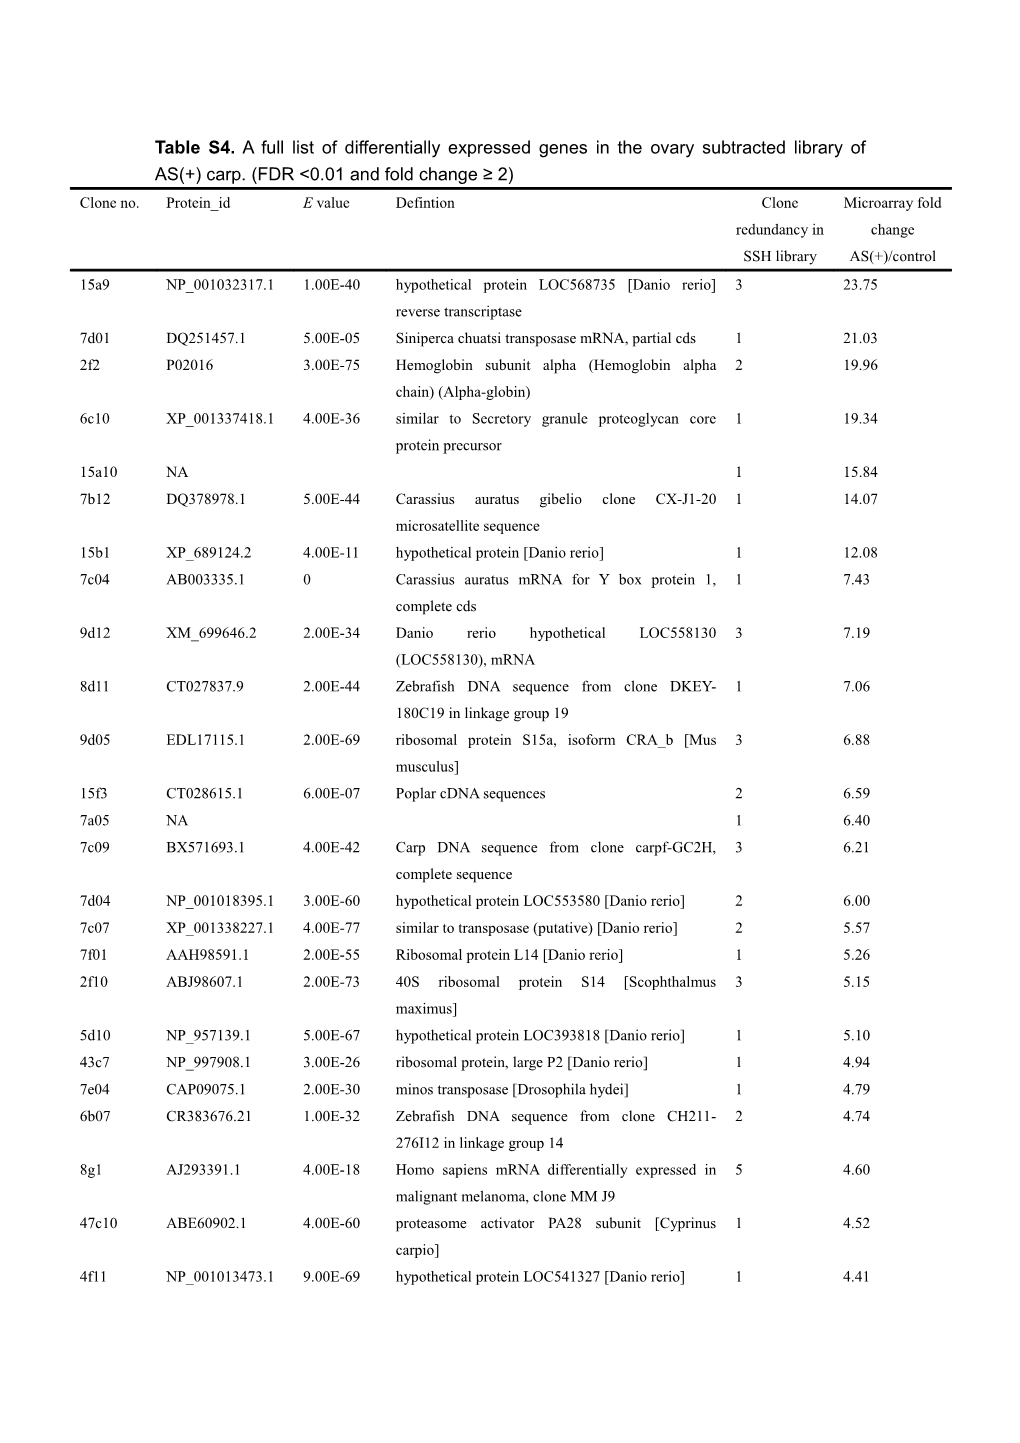 Table S4. a Full List of Differentially Expressed Genes in the Ovary Subtracted Library